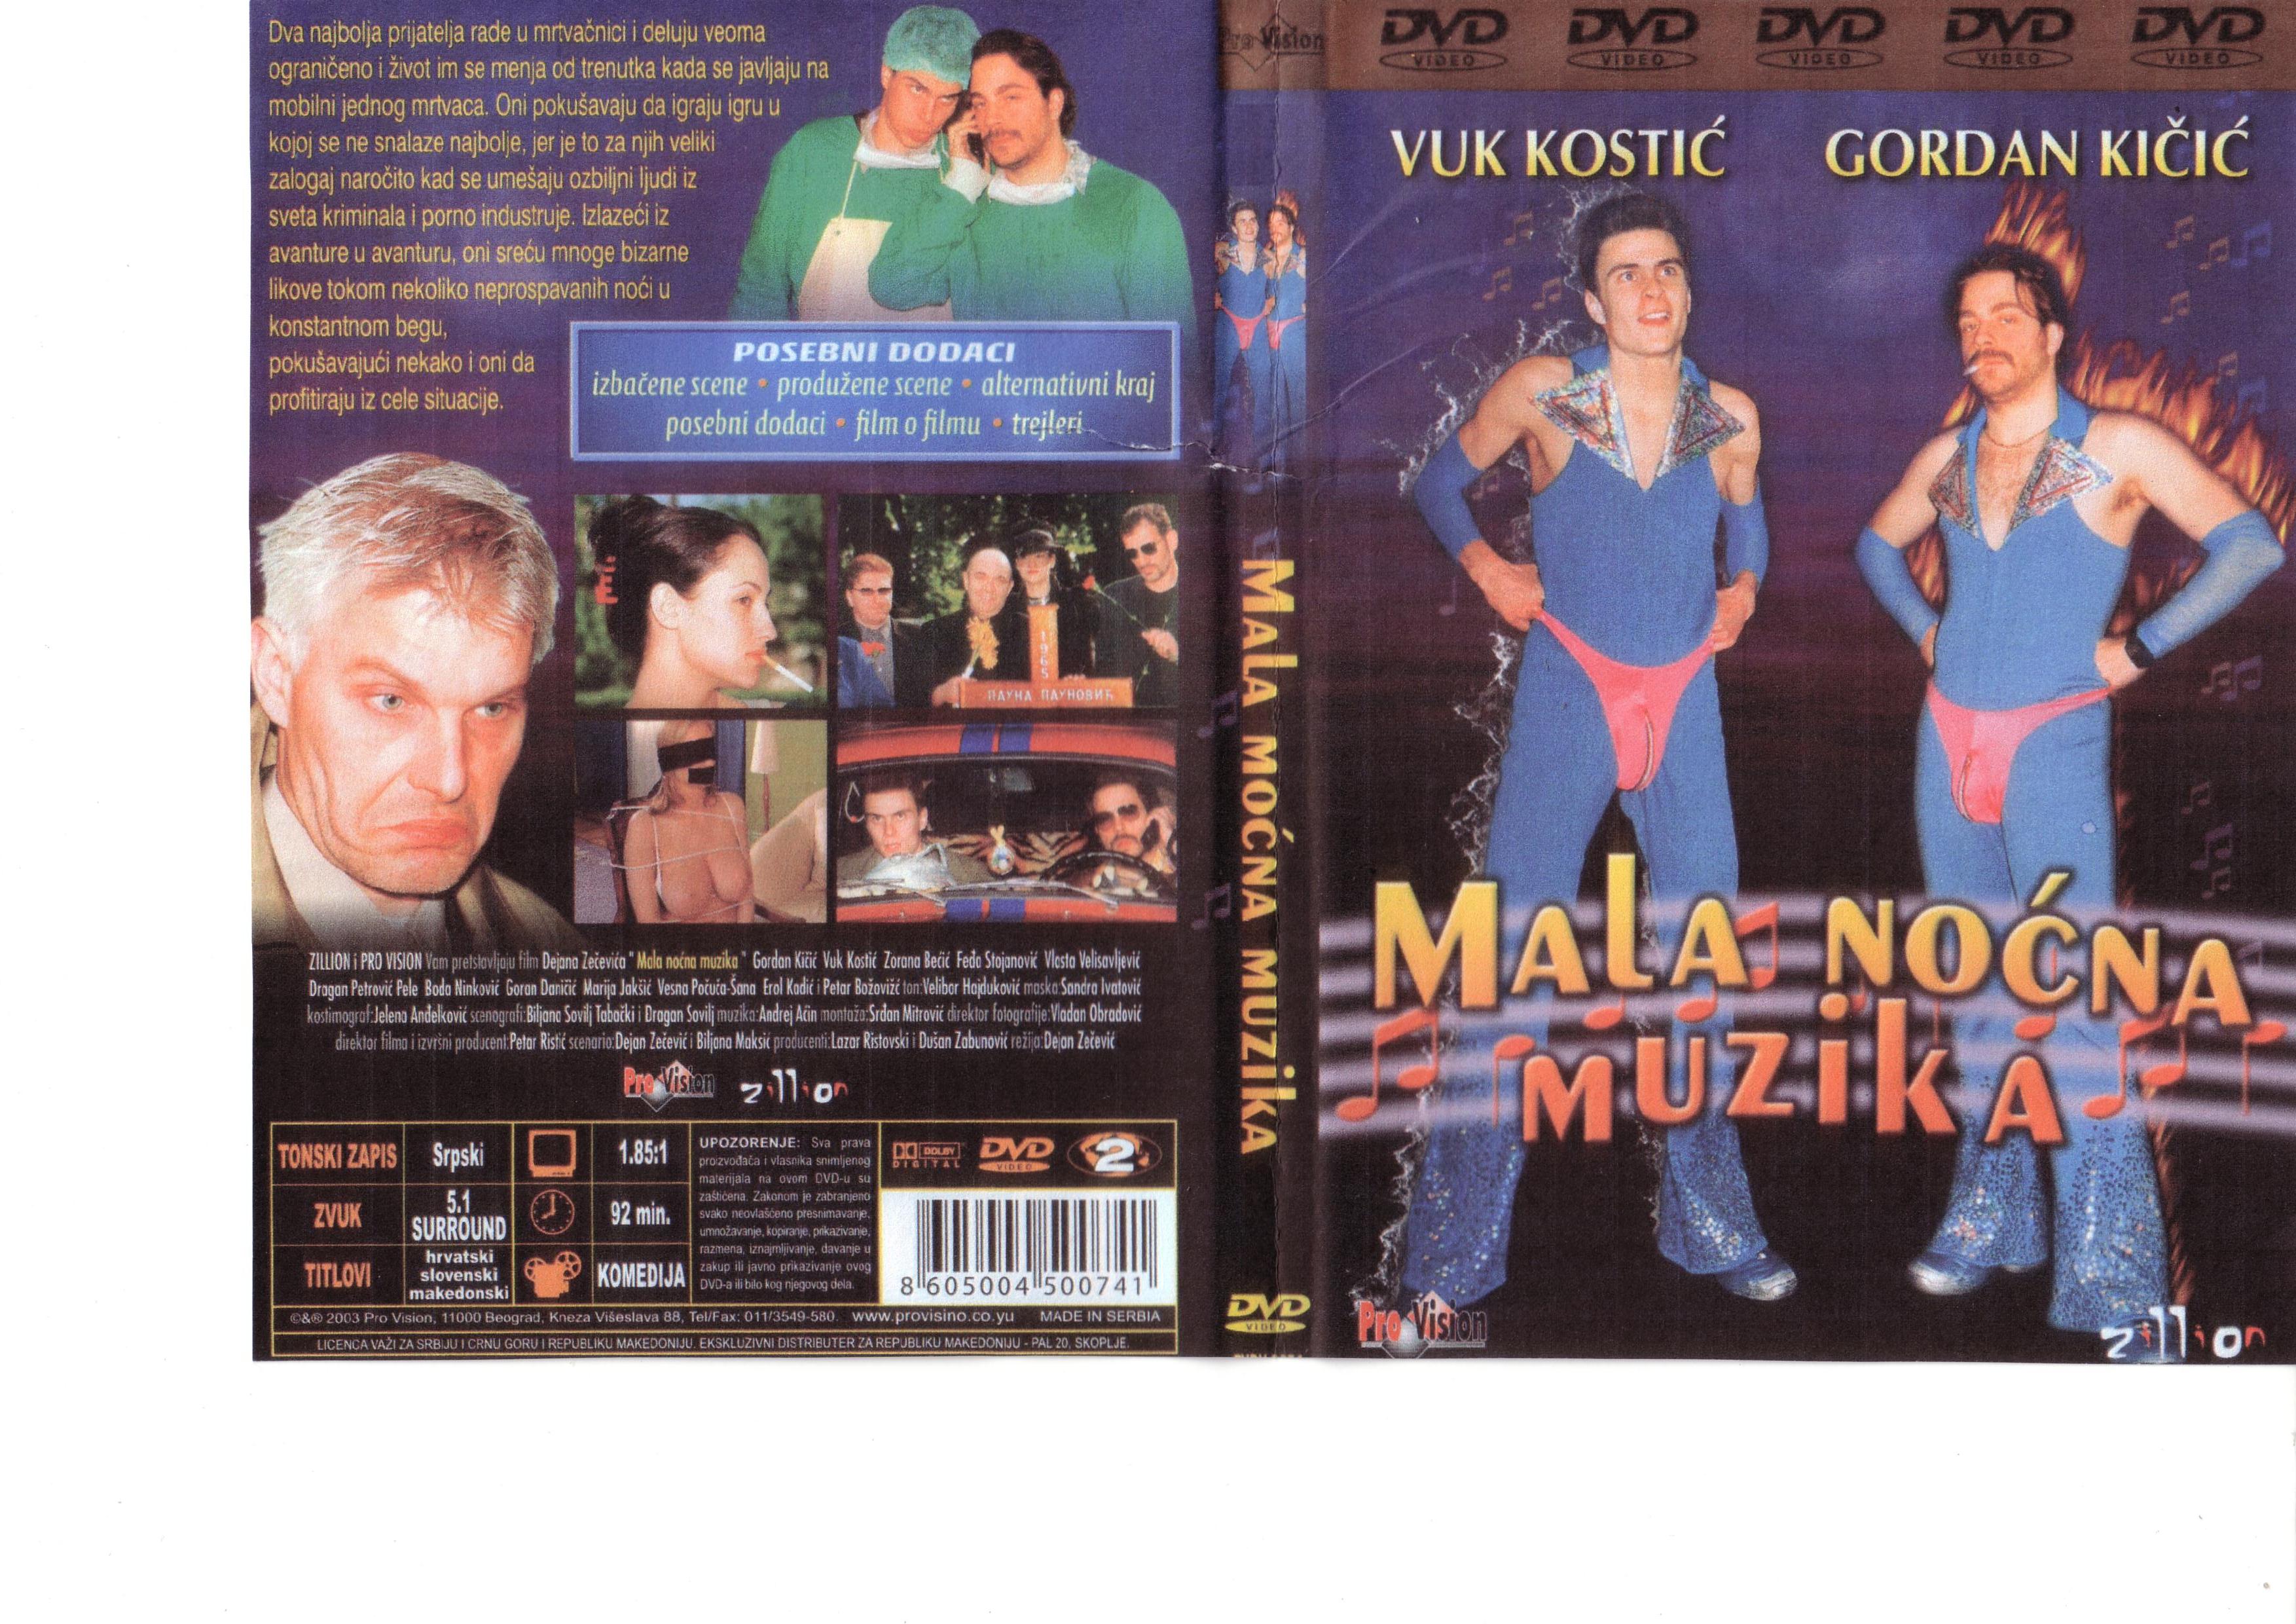 Click to view full size image -  DVD Cover - M - DVD - MALA  NOCNA  MUZIKA - DVD - MALA  NOCNA  MUZIKA.JPG